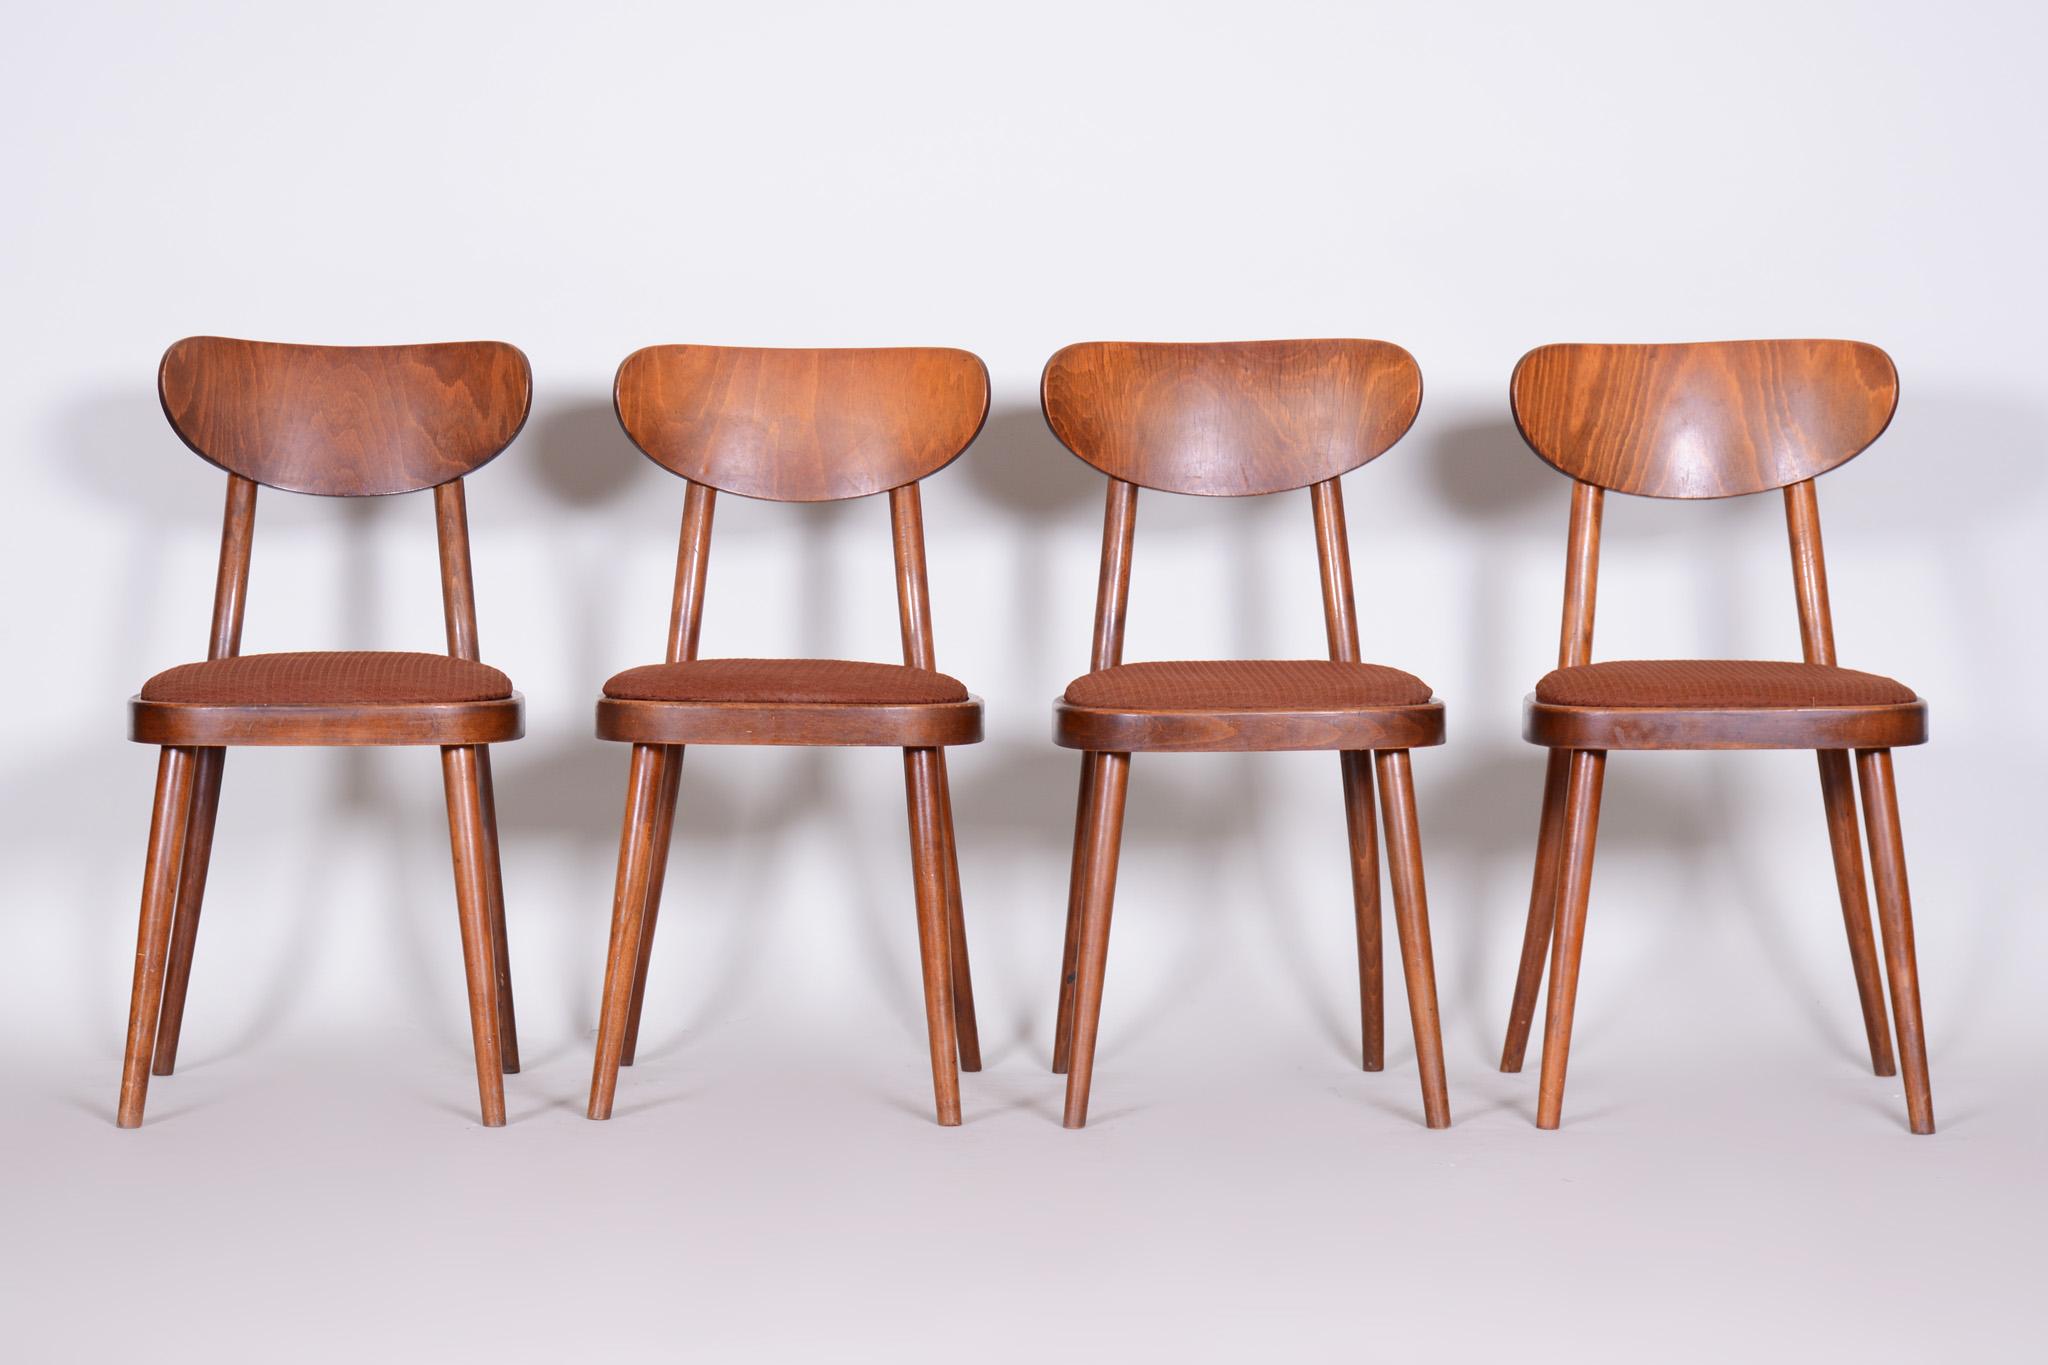 Mid-Century Modern Czech Brown Beech Midcentury Chairs, 4 Pieces, 1940s, Well Preserved Condition